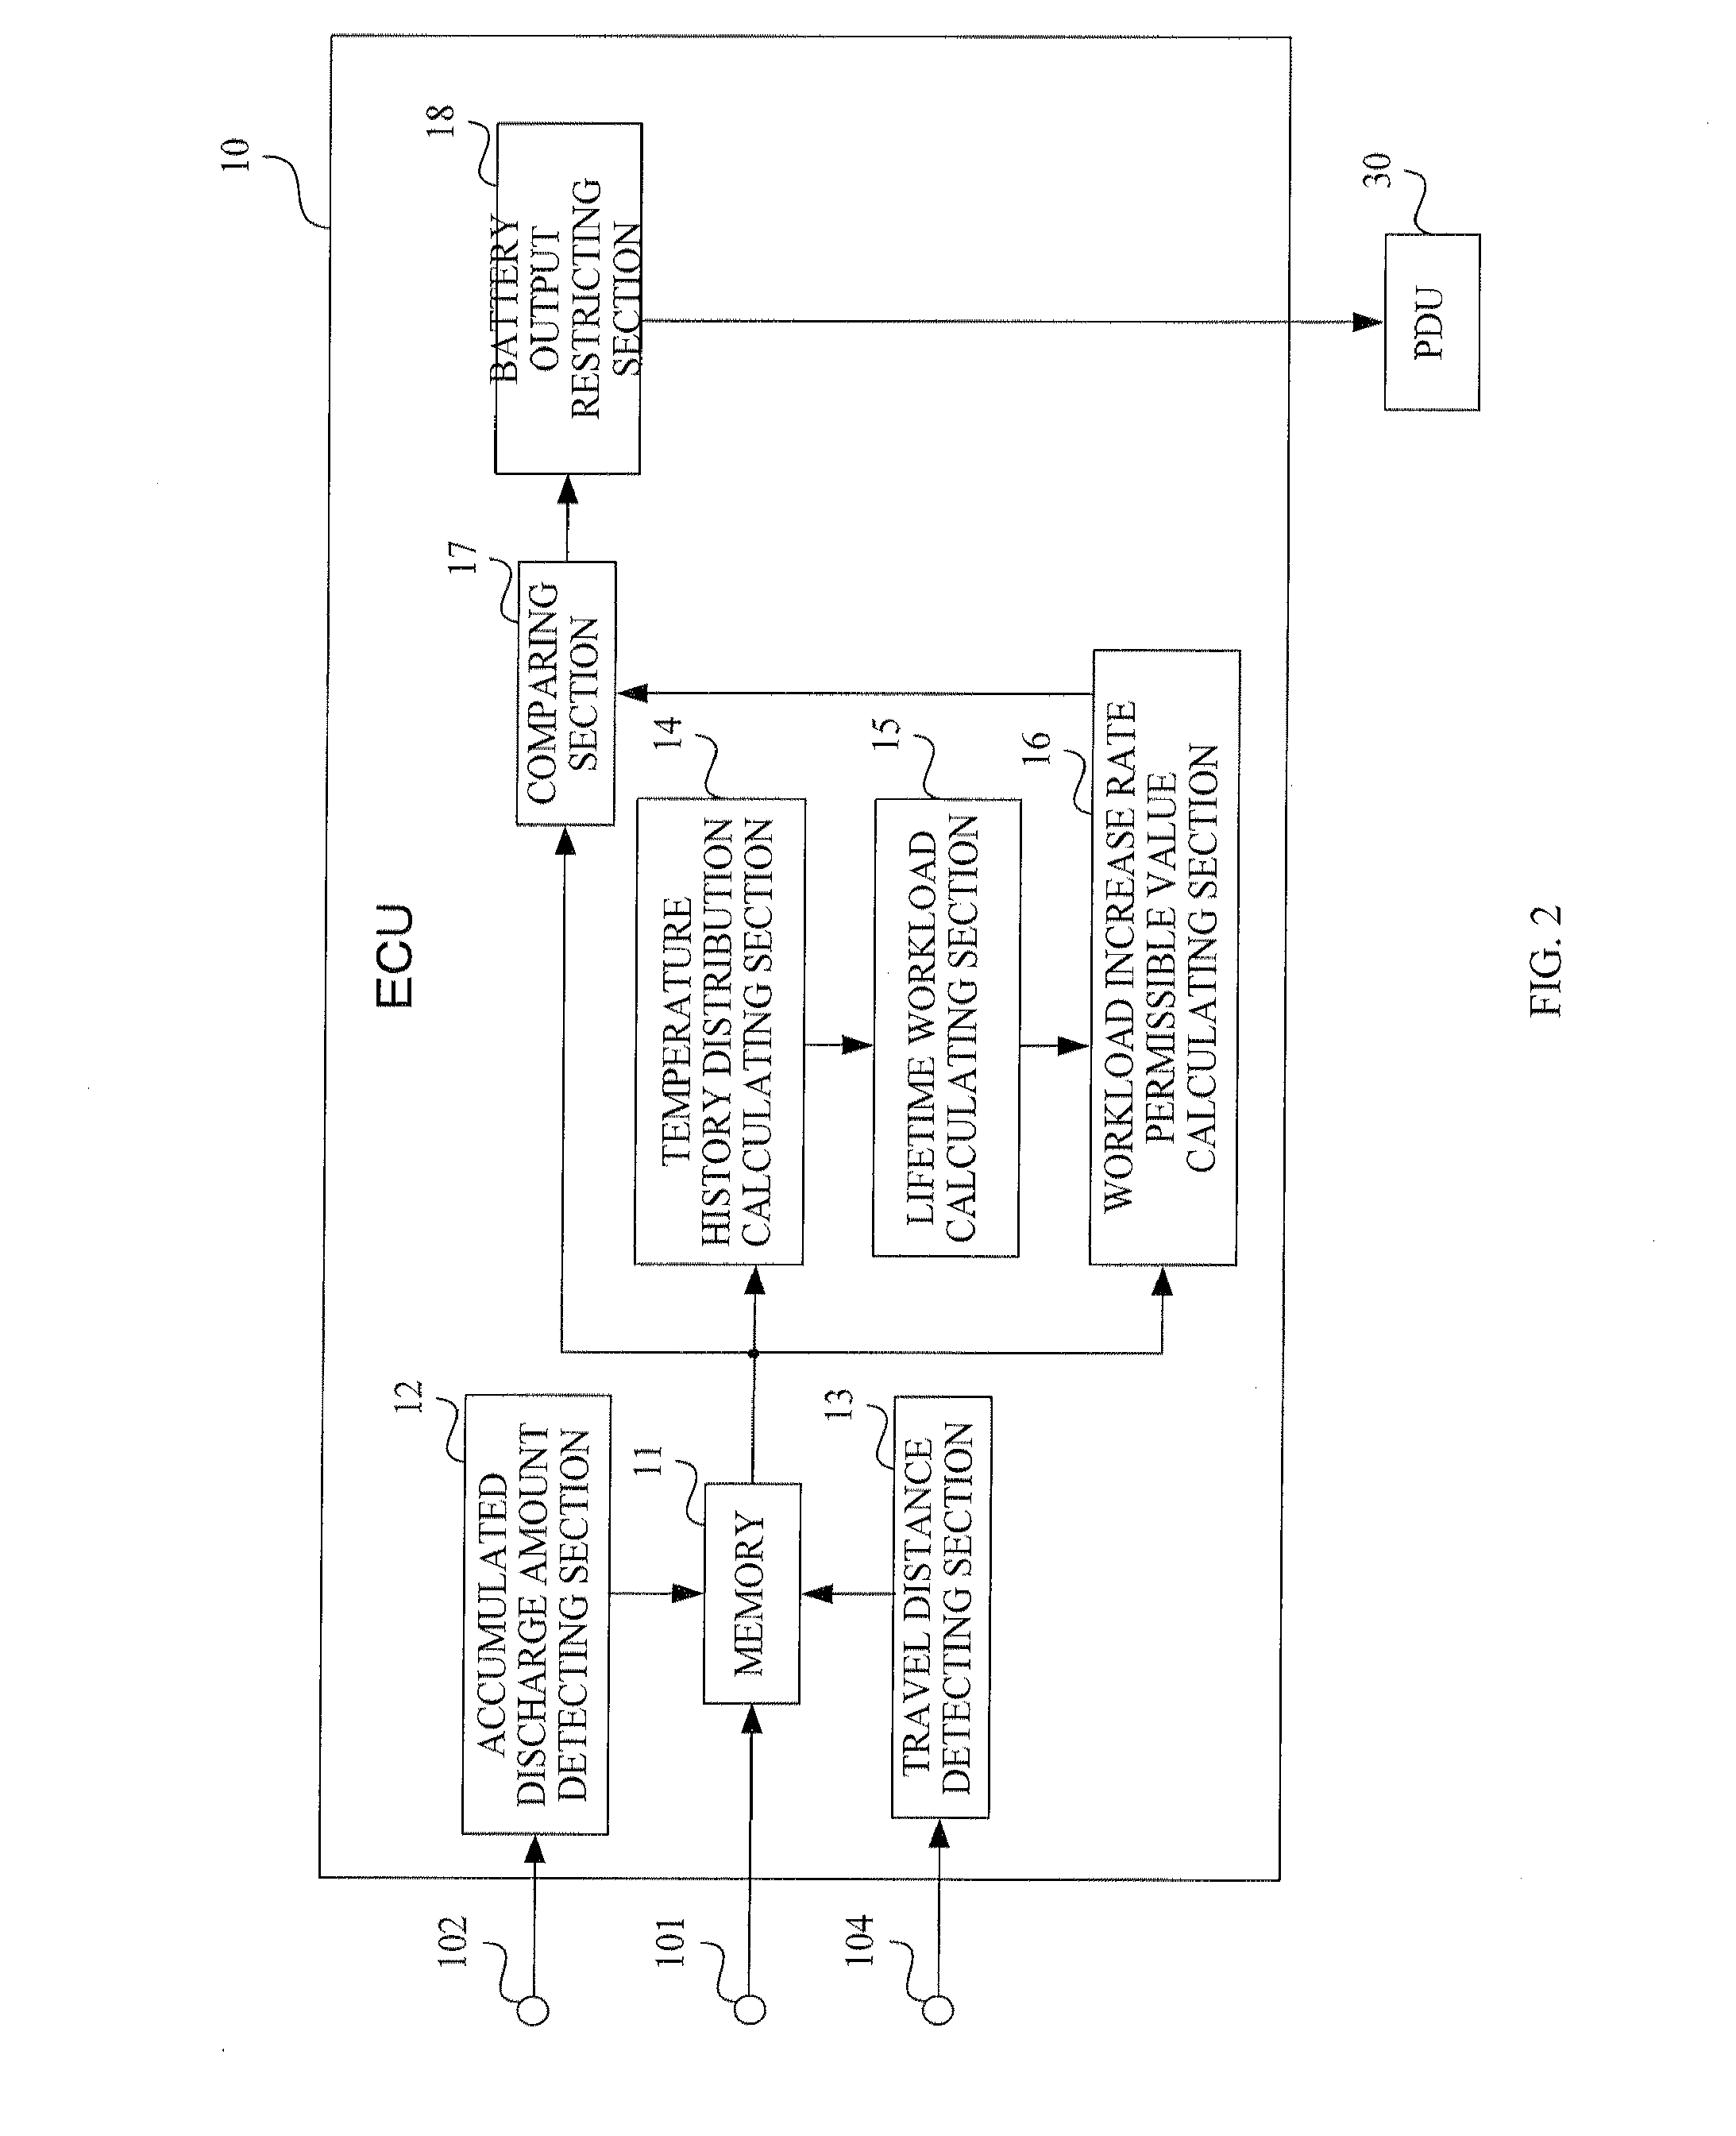 Battery charge/discharge control apparatus